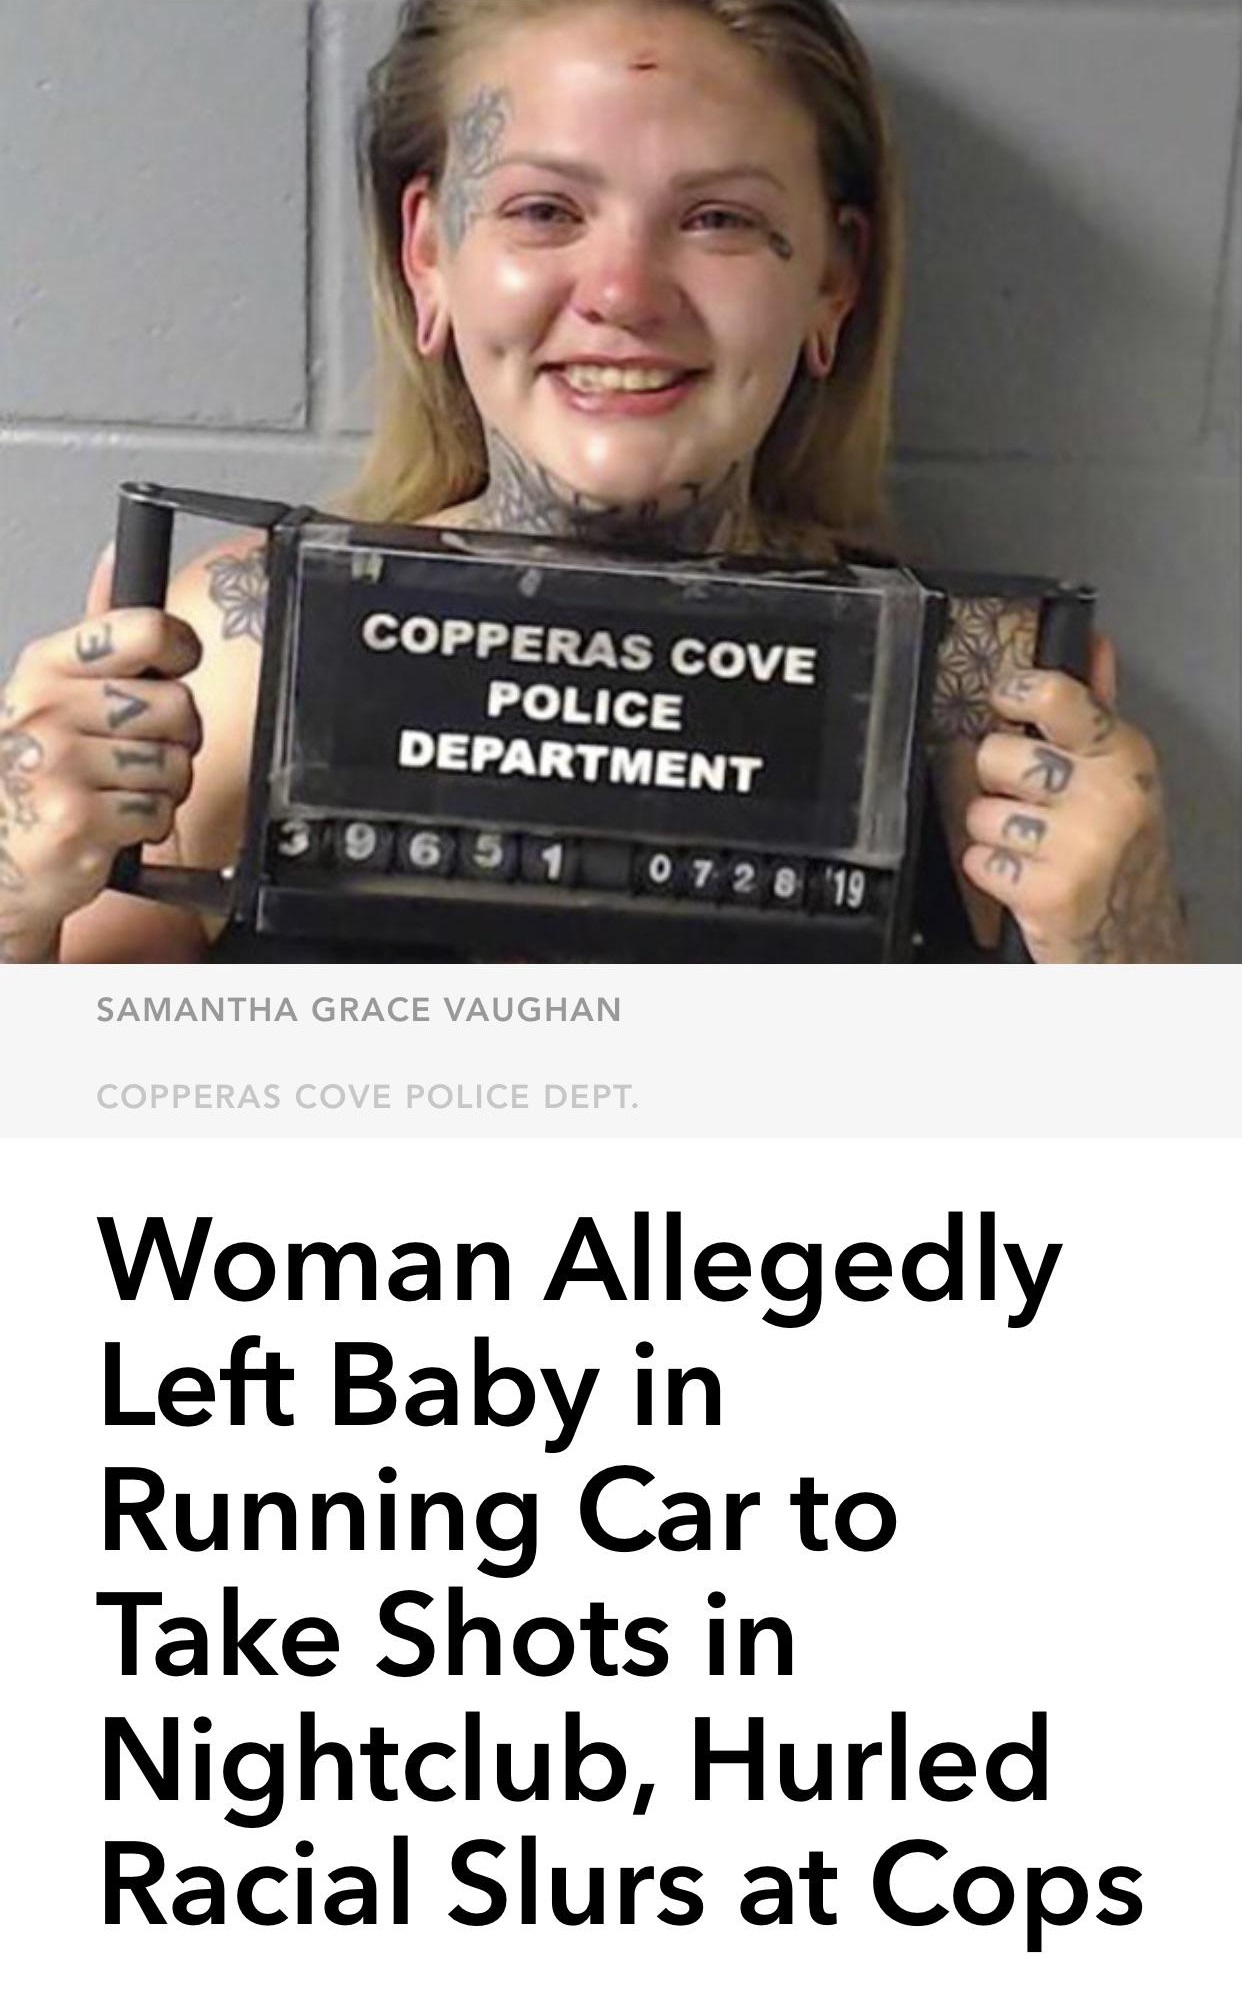 Copperas Cove Police Department 239165072 10 Samantha Grace Vaughan Copperas Cove Police Dept. Woman Allegedly Left Baby in Running Car to Take Shots in Nightclub, Hurled Racial Slurs at Cops